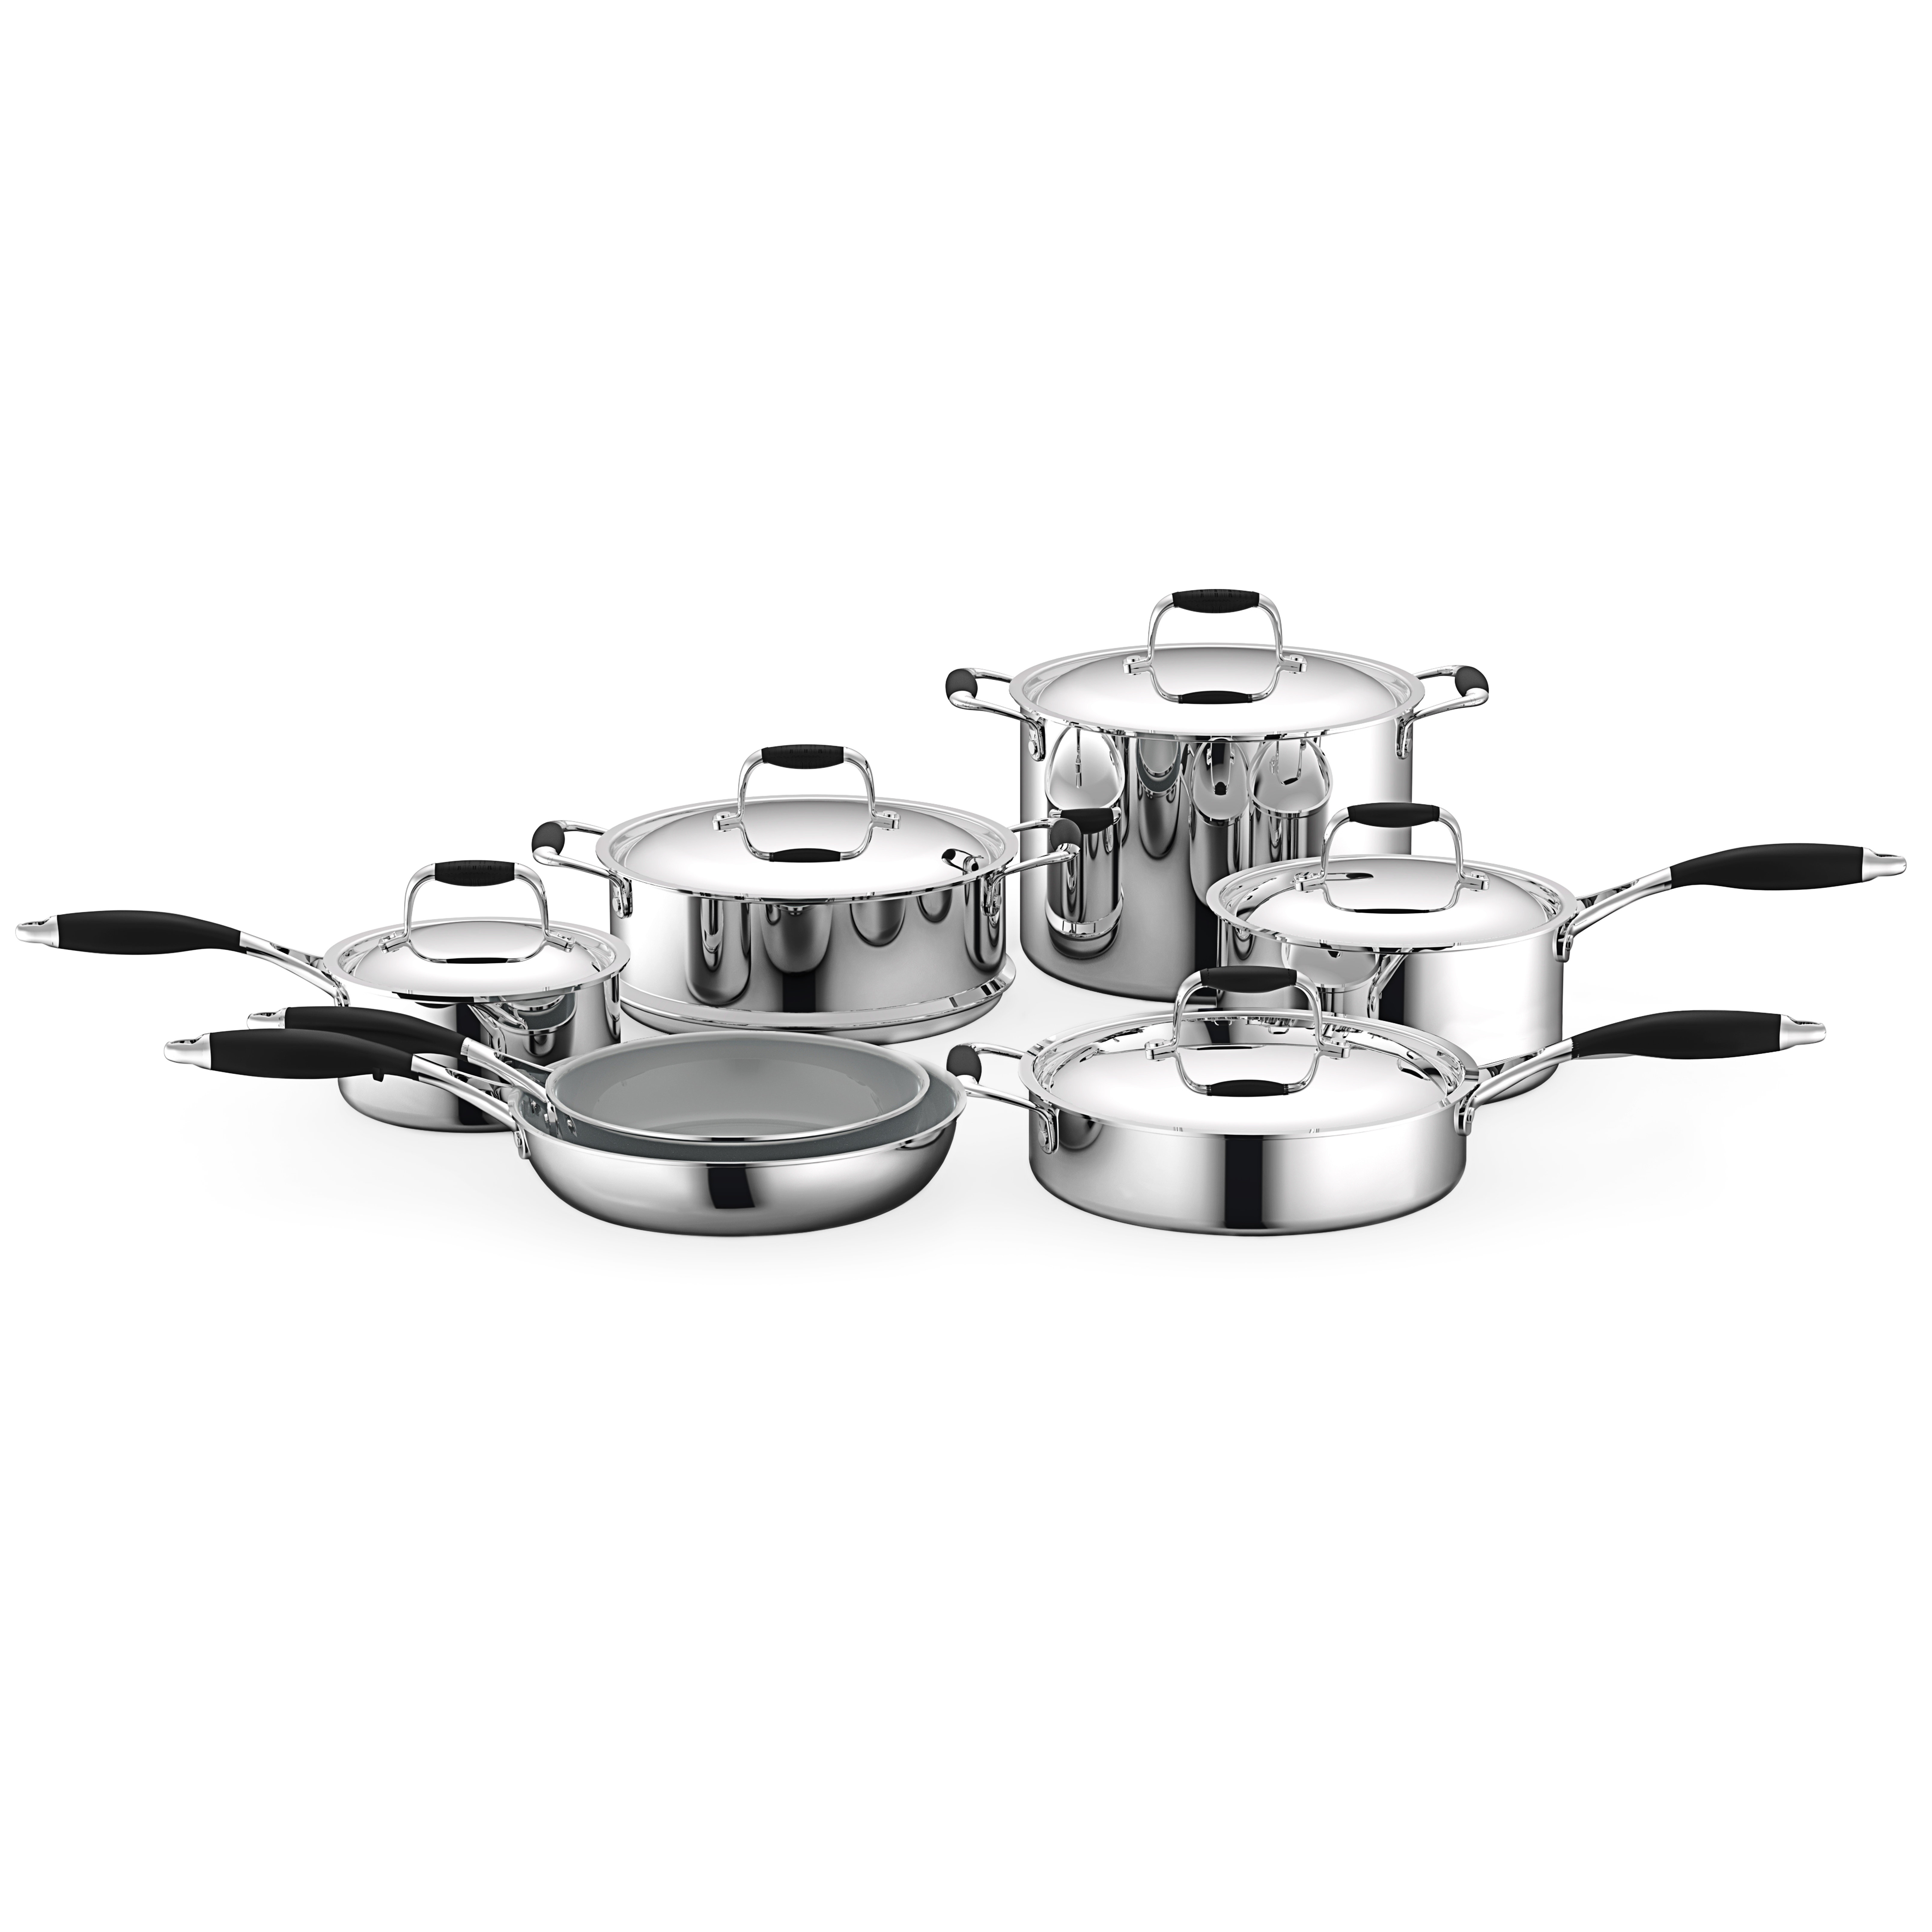  NutriChef 6-Piece Cookware Set Stainless Steel - 3